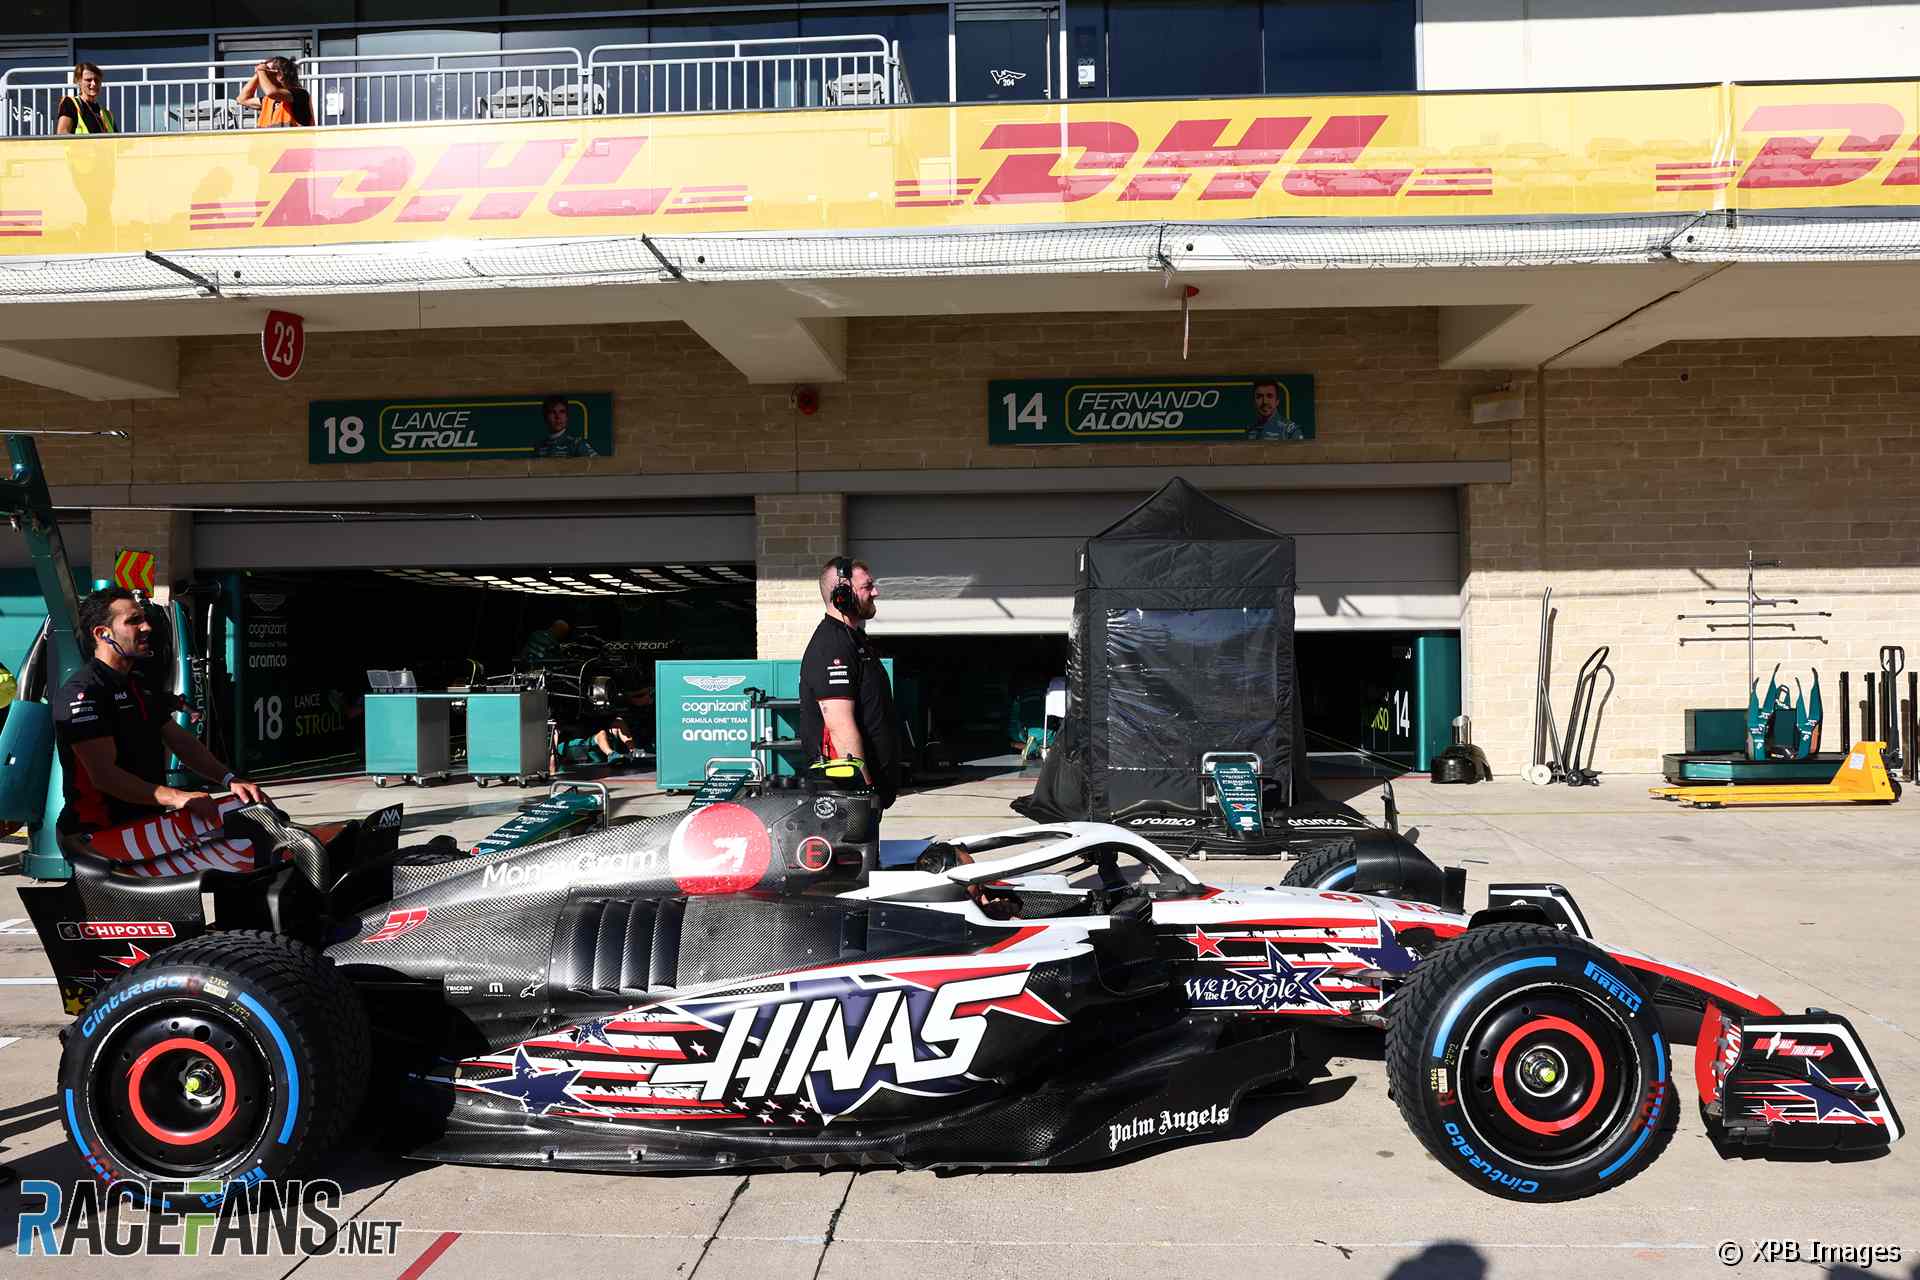 Haas United States Grand Prix livery, Circuit of the Americas, 2023